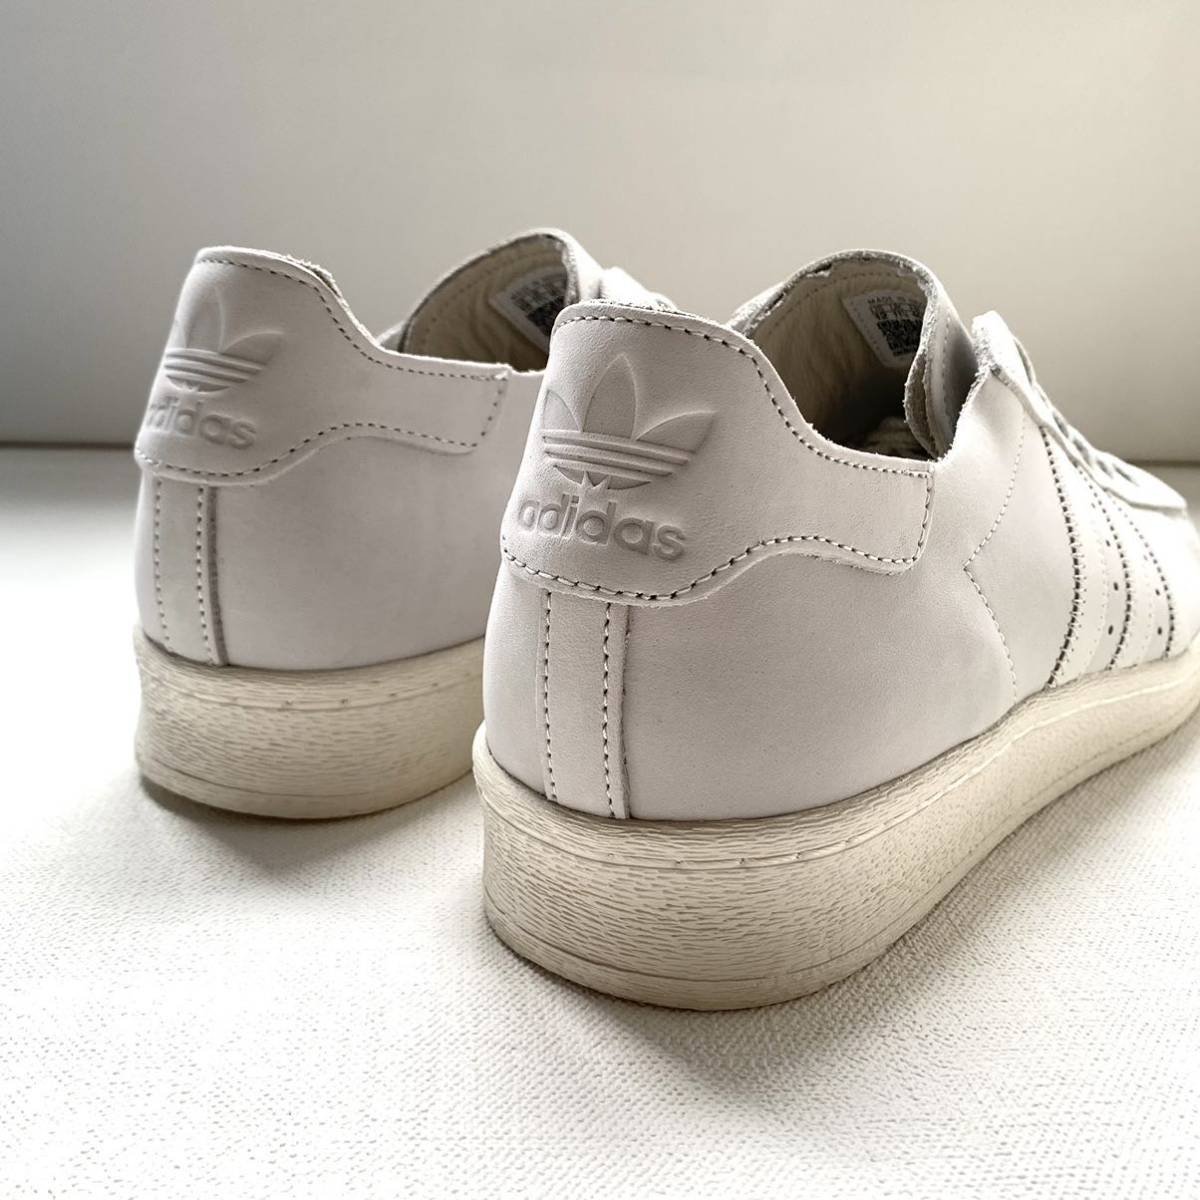  new goods Adidas adidas SUPERSTAR super Star 82 sneakers 30..1.98 ten thousand men's original leather IG2477 core white US12 free shipping 